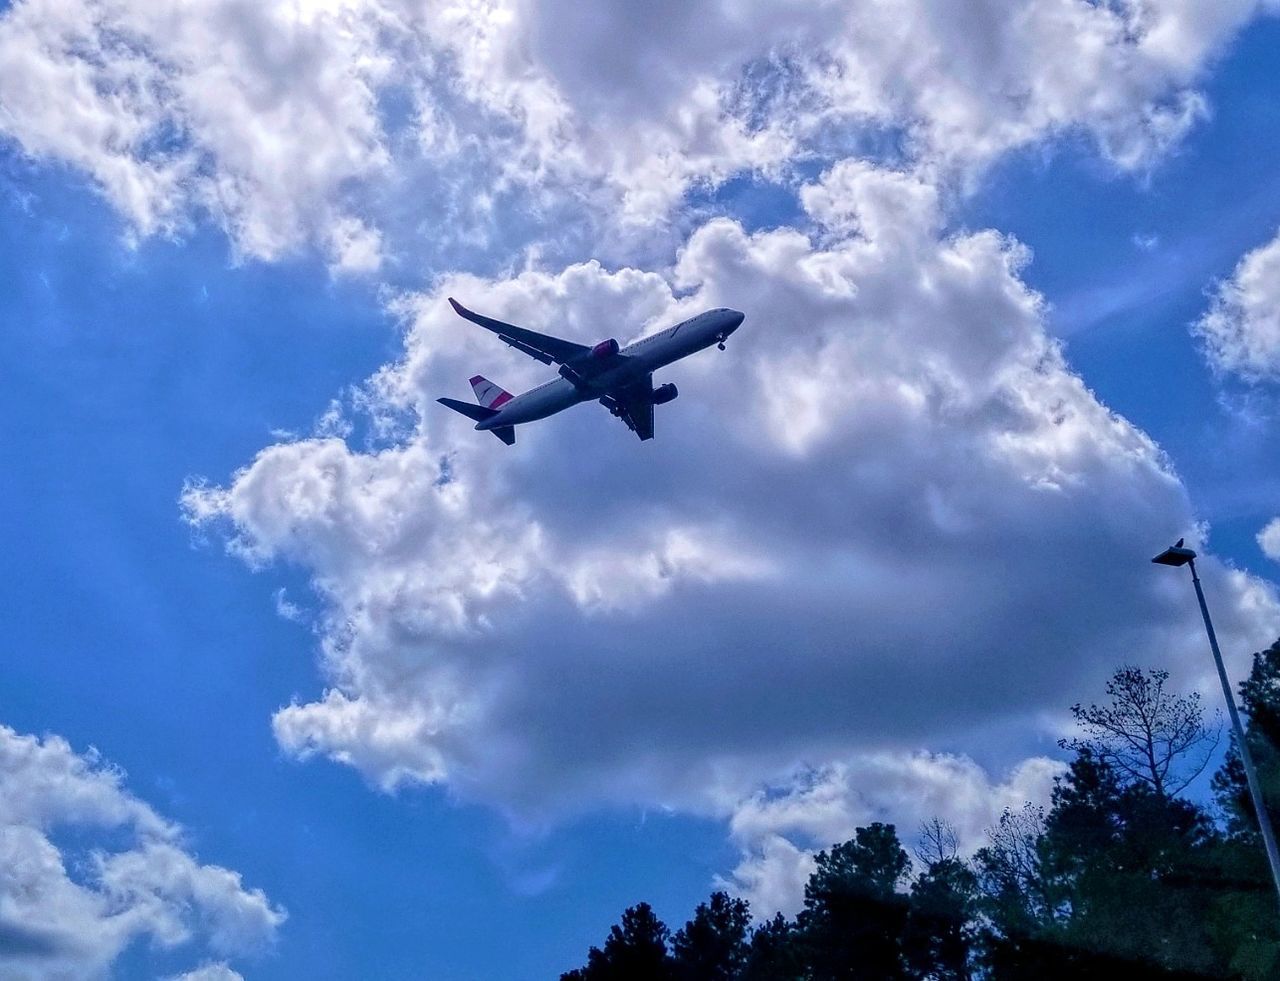 cloud - sky, sky, low angle view, air vehicle, transportation, airplane, flying, mode of transportation, nature, mid-air, no people, travel, outdoors, blue, motion, day, tree, beauty in nature, on the move, plane, ominous